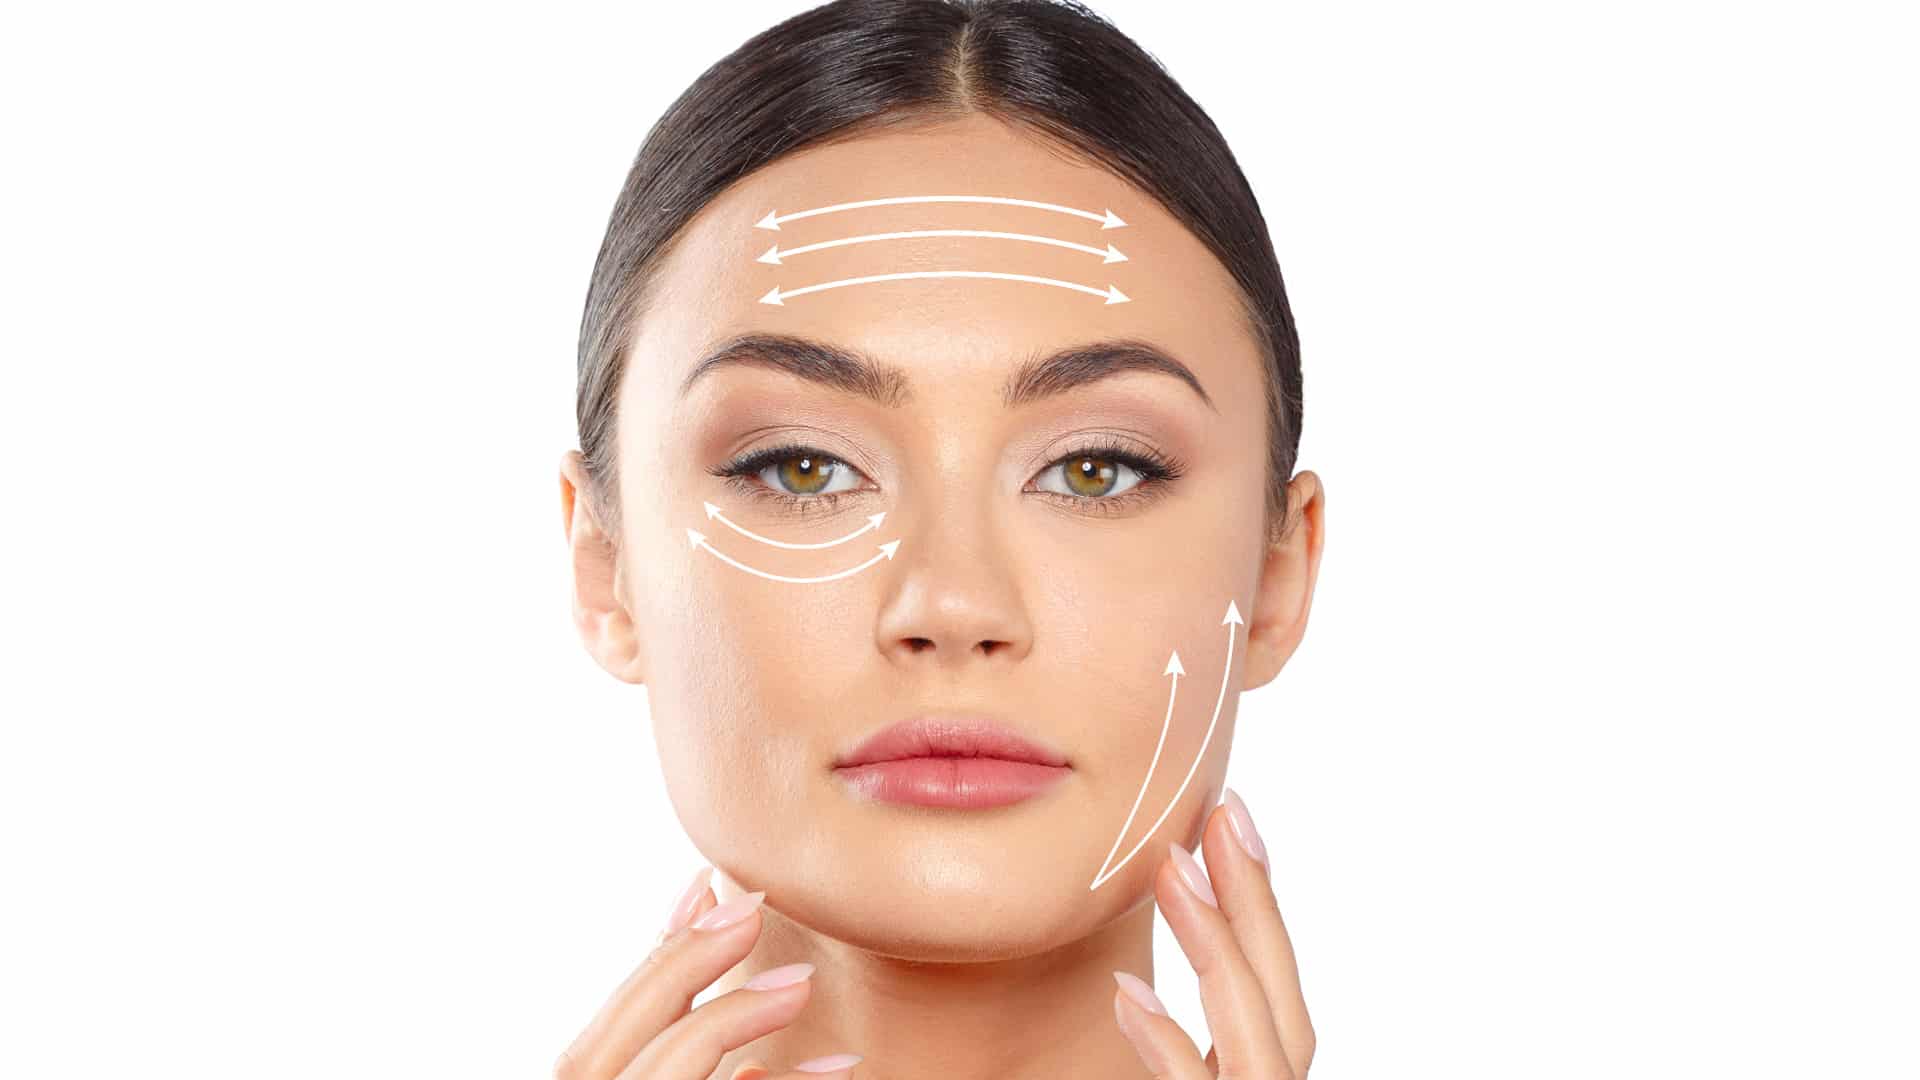 What You Should Know Before Having a Facelift